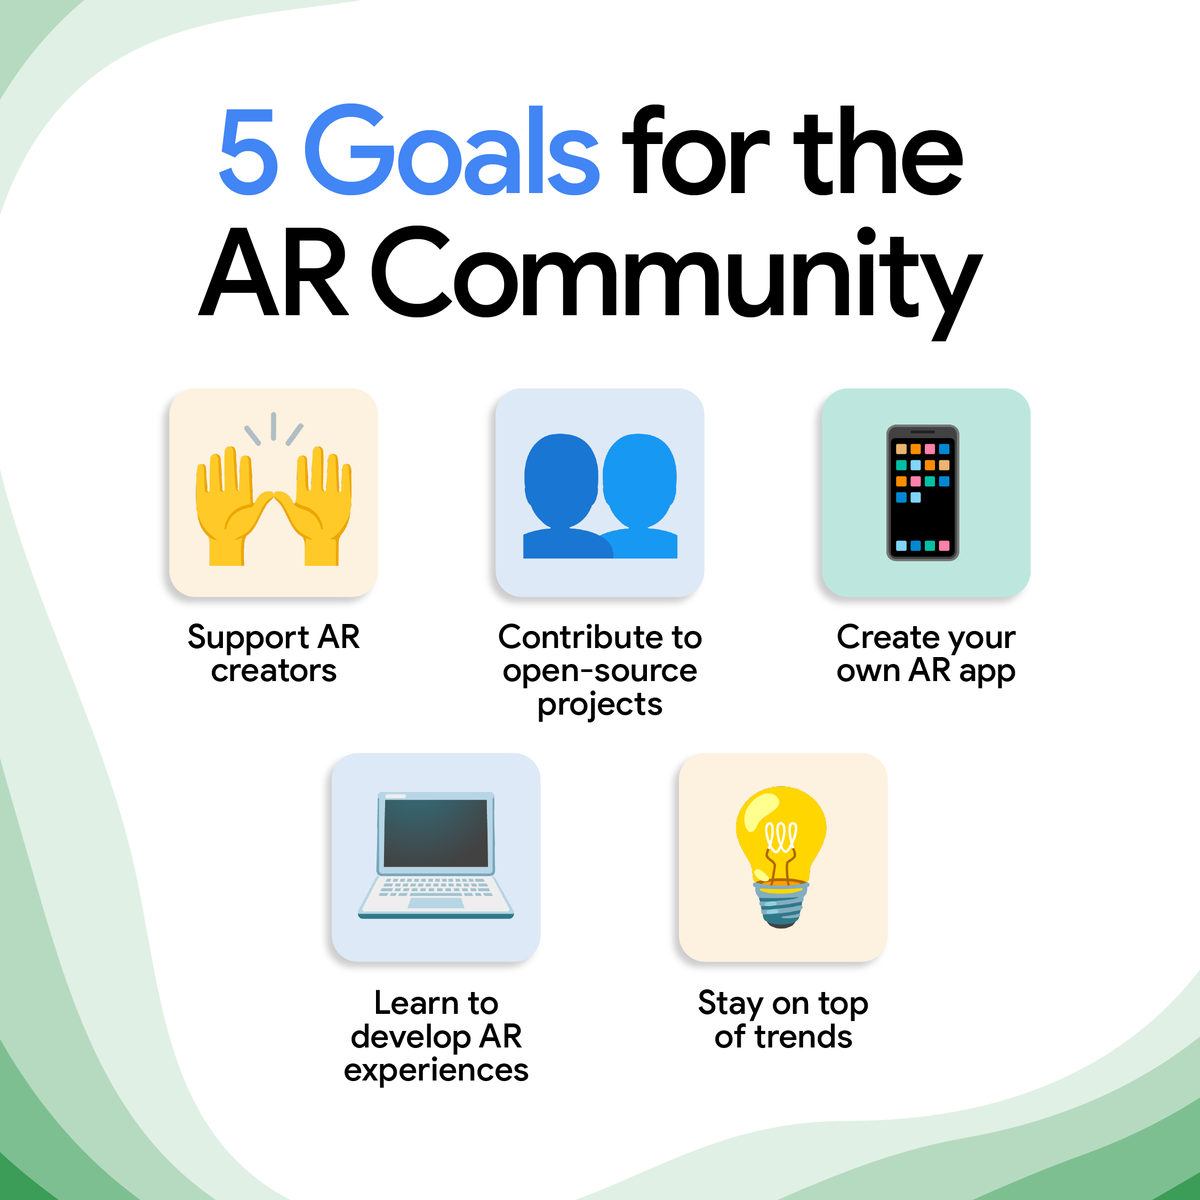 Whether you’re new to the world of AR, a casual creator, or an experienced veteran, we’re sharing a few ways to help you feel more connected to the #AR community. Which goal will you focus on?